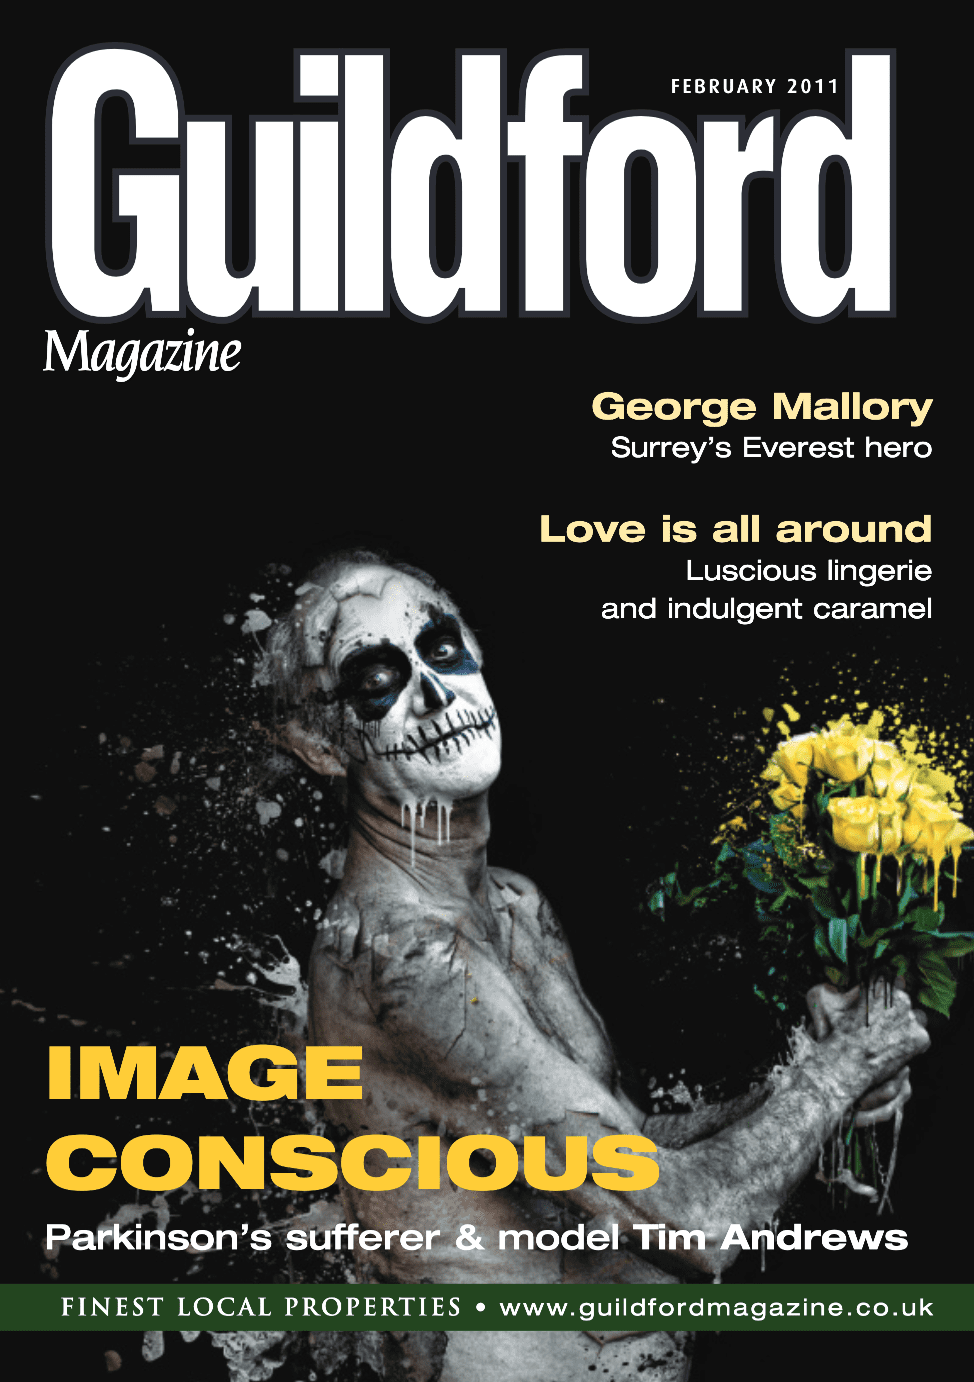 guildford magazine january 2011 front cover